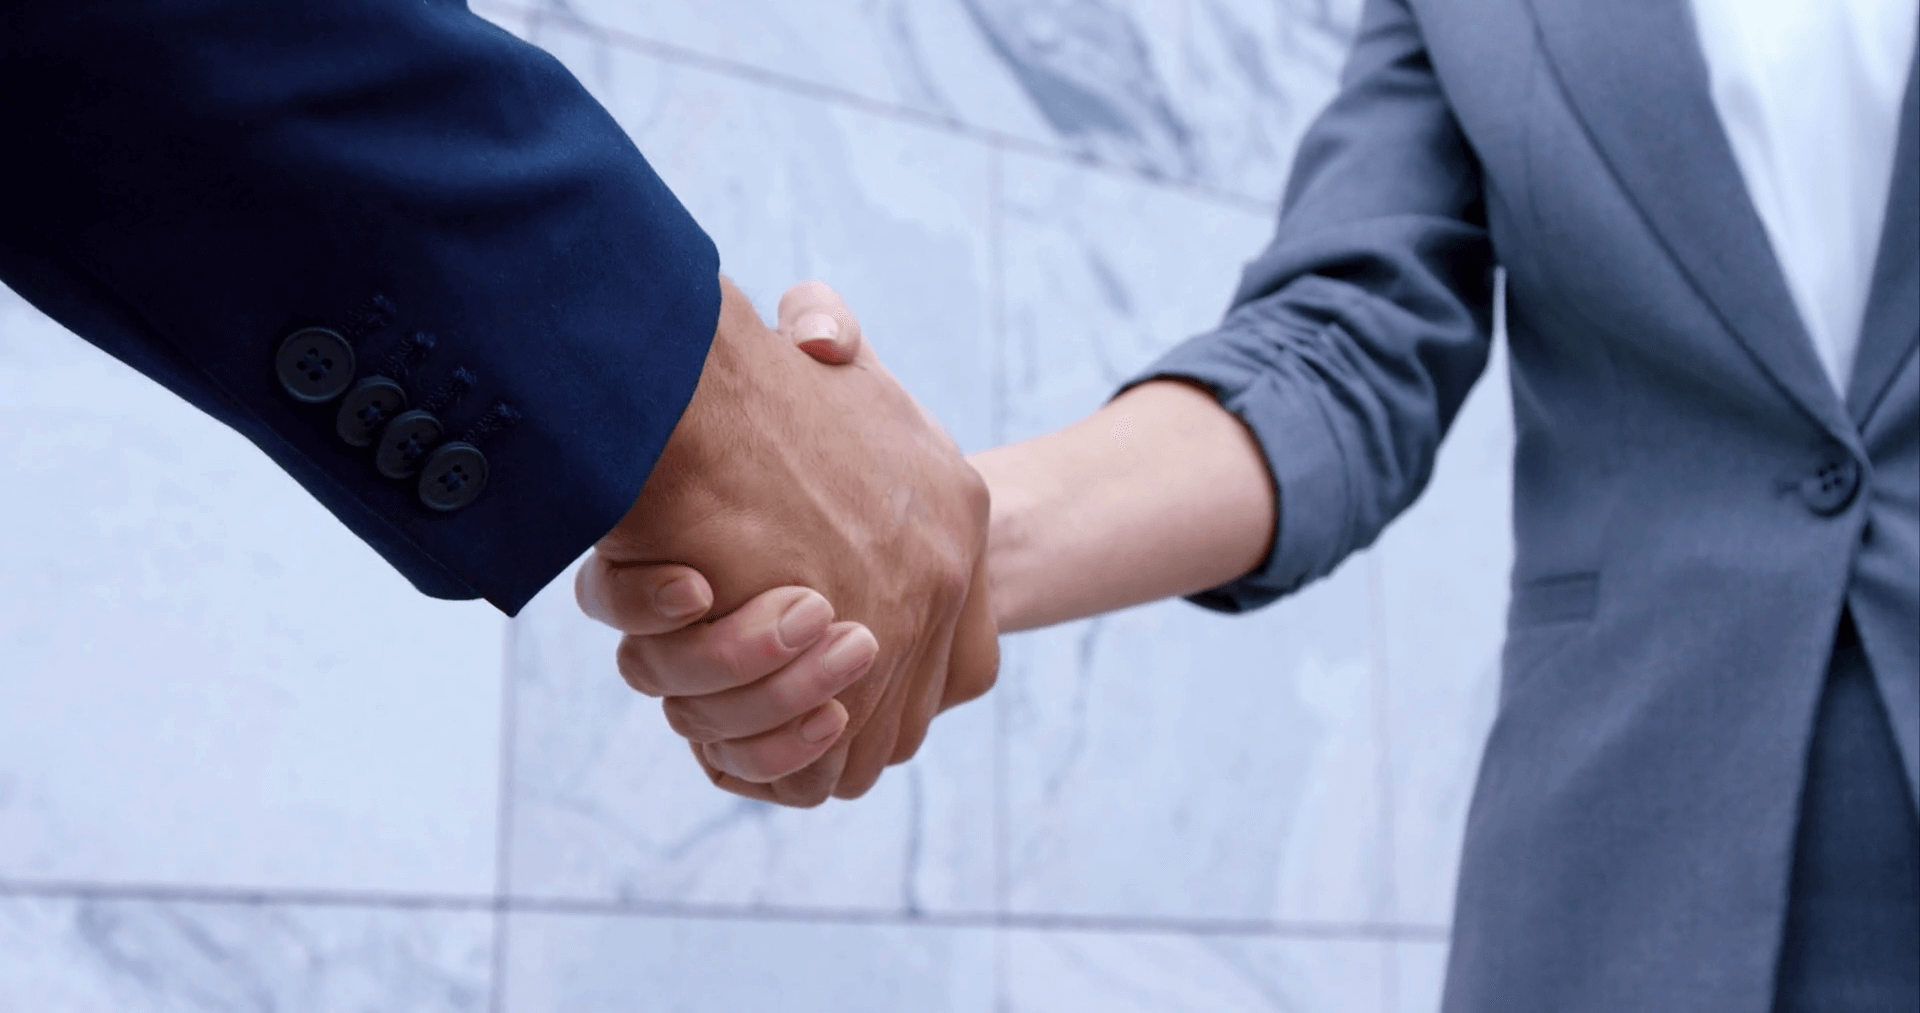 Two people wearing suits exchange a firm handshake